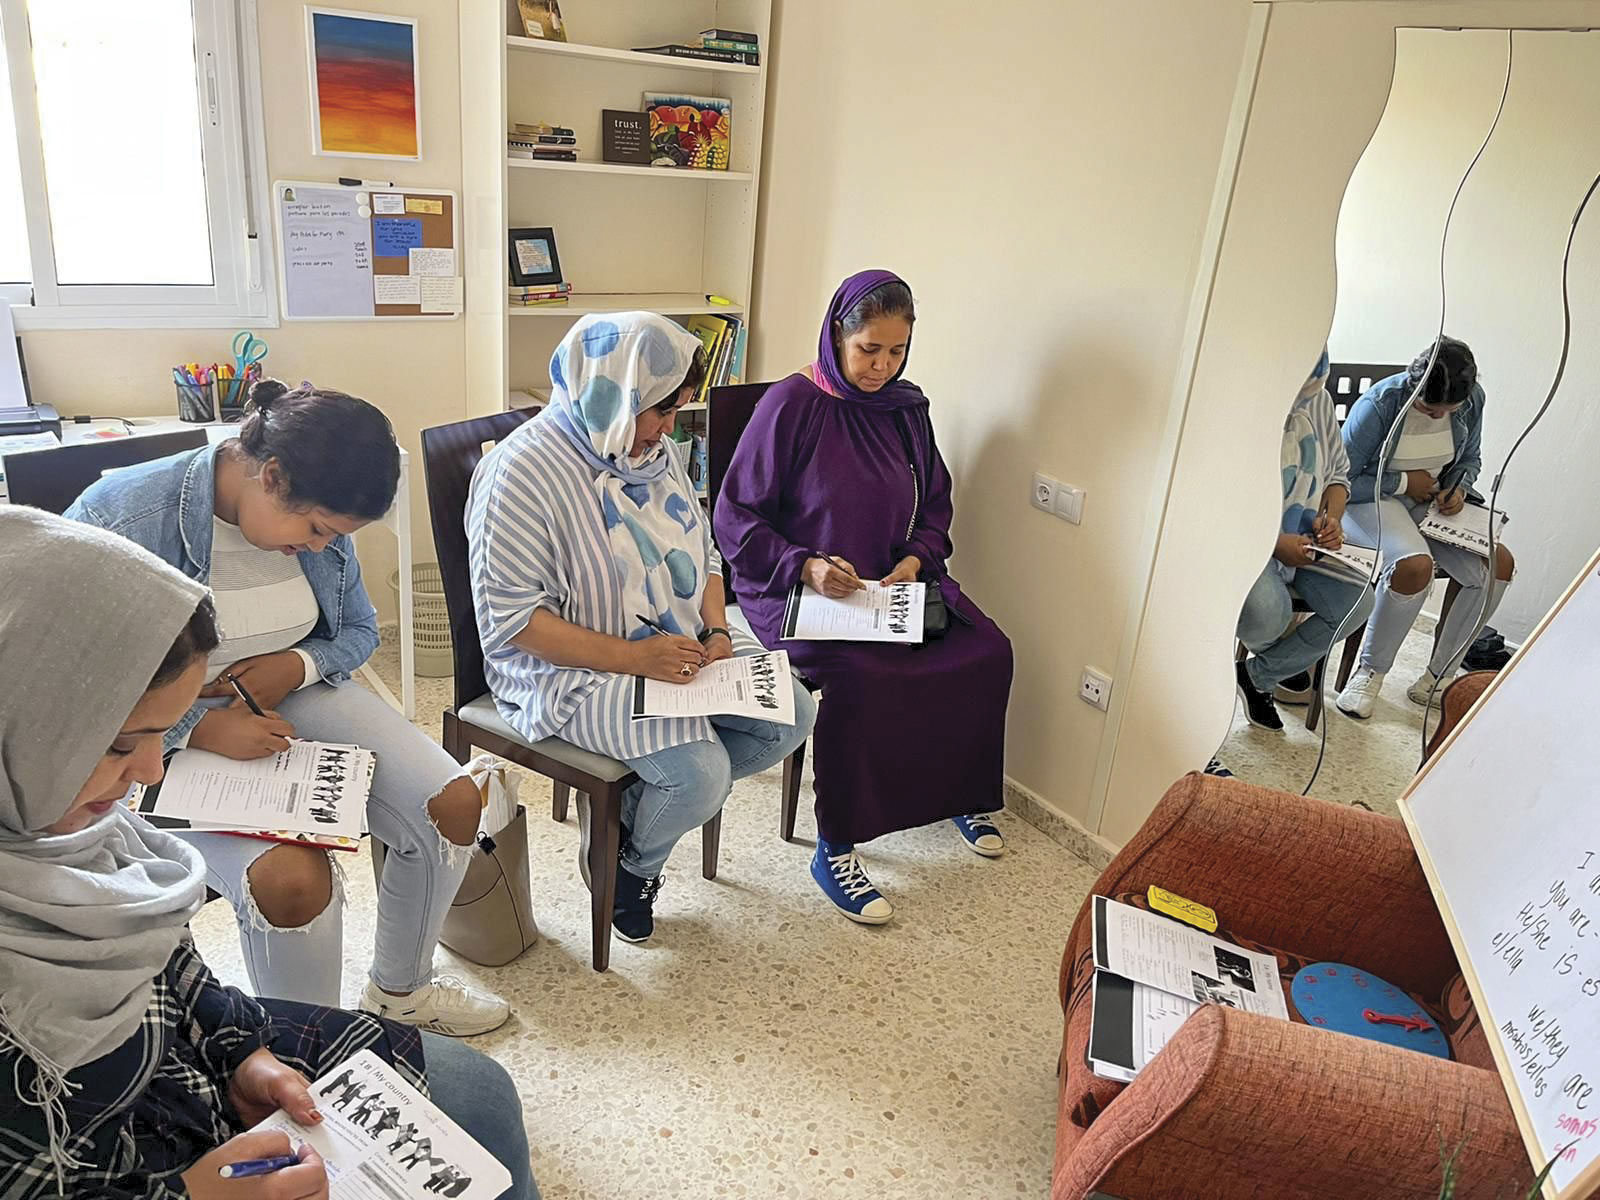 Middle Eastern refugees in an apartment in Greece learning how to speak a new language.